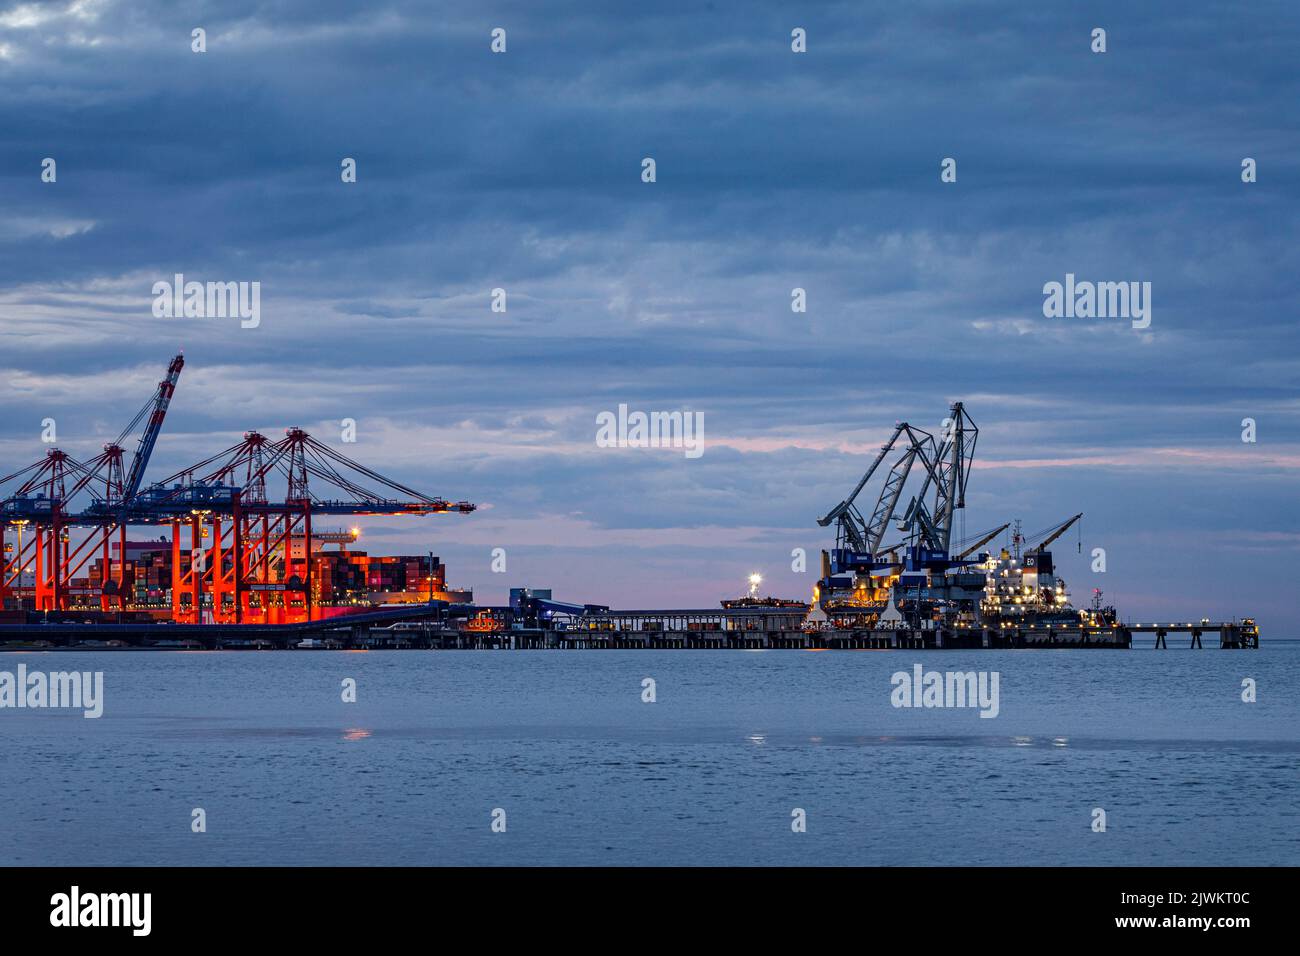 Jade-Weser-Port, container terminal in Wilhelmshafen, cargo handling of a large container ship (left and a general cargo ship (right) Stock Photo